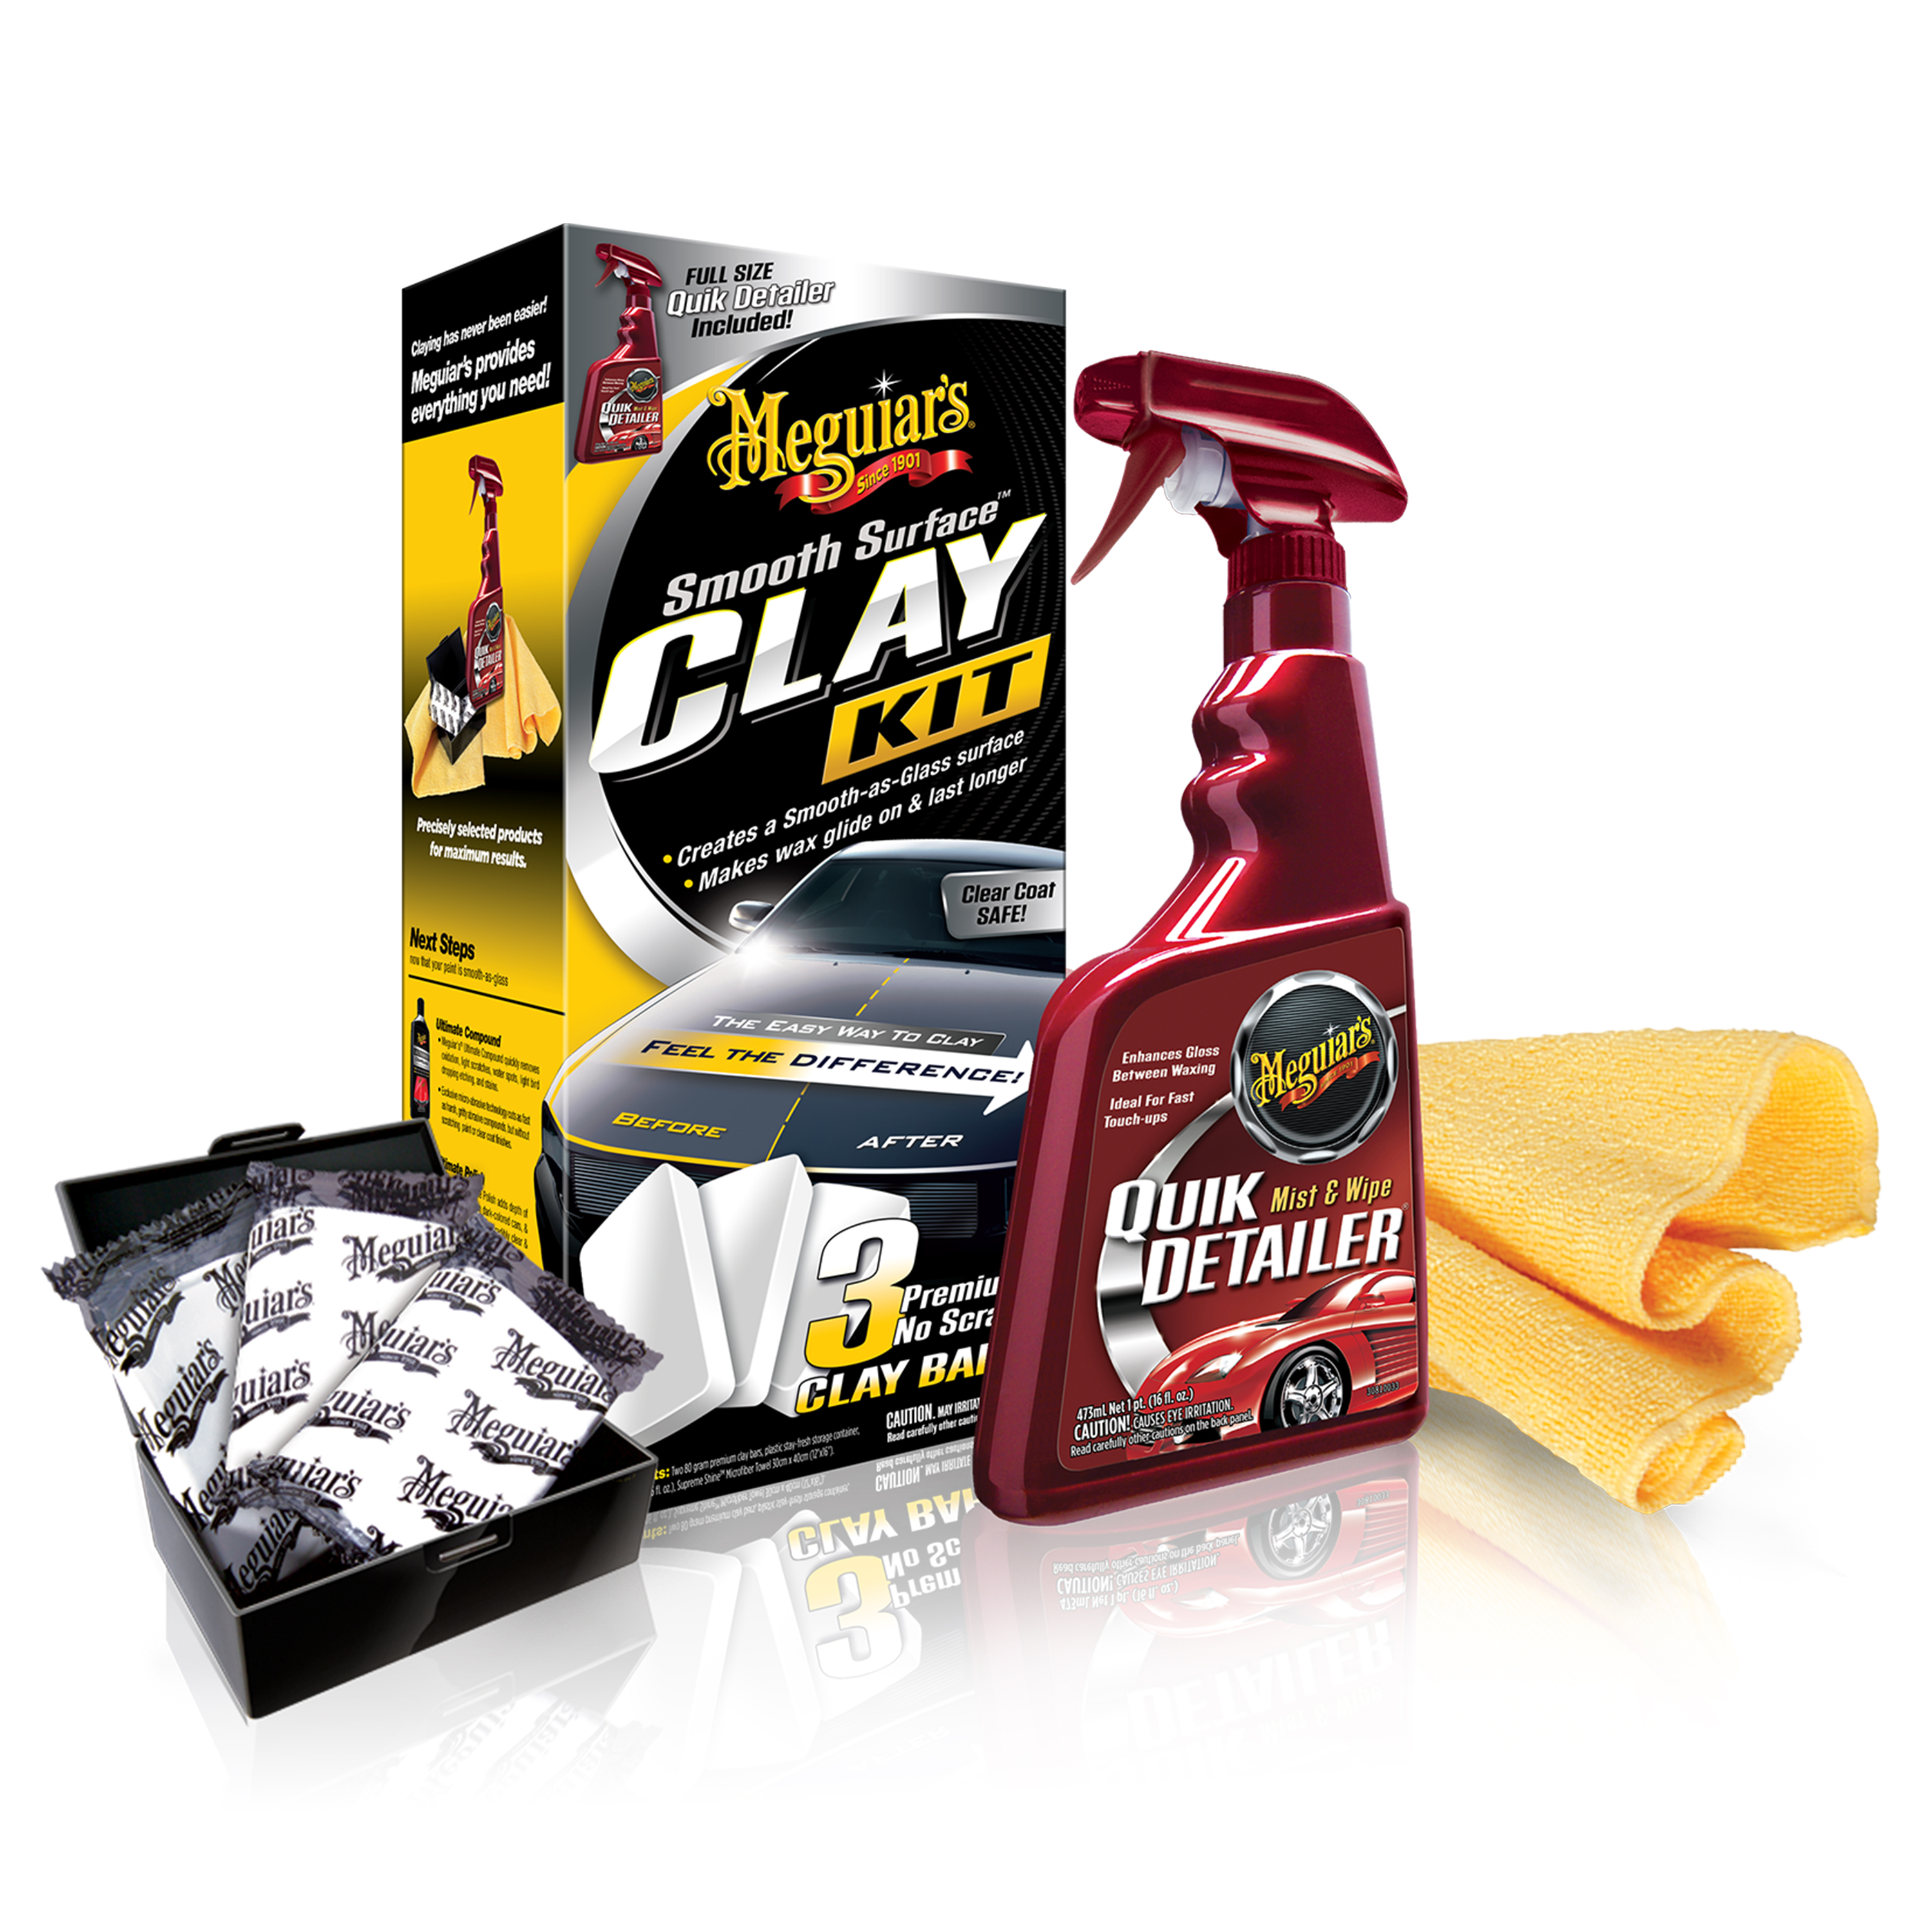 Meguiar's Smooth Surface Clay Kit - Safe and Easy Car Claying for a smooth as Glass Finish, G191700 - image 3 of 16